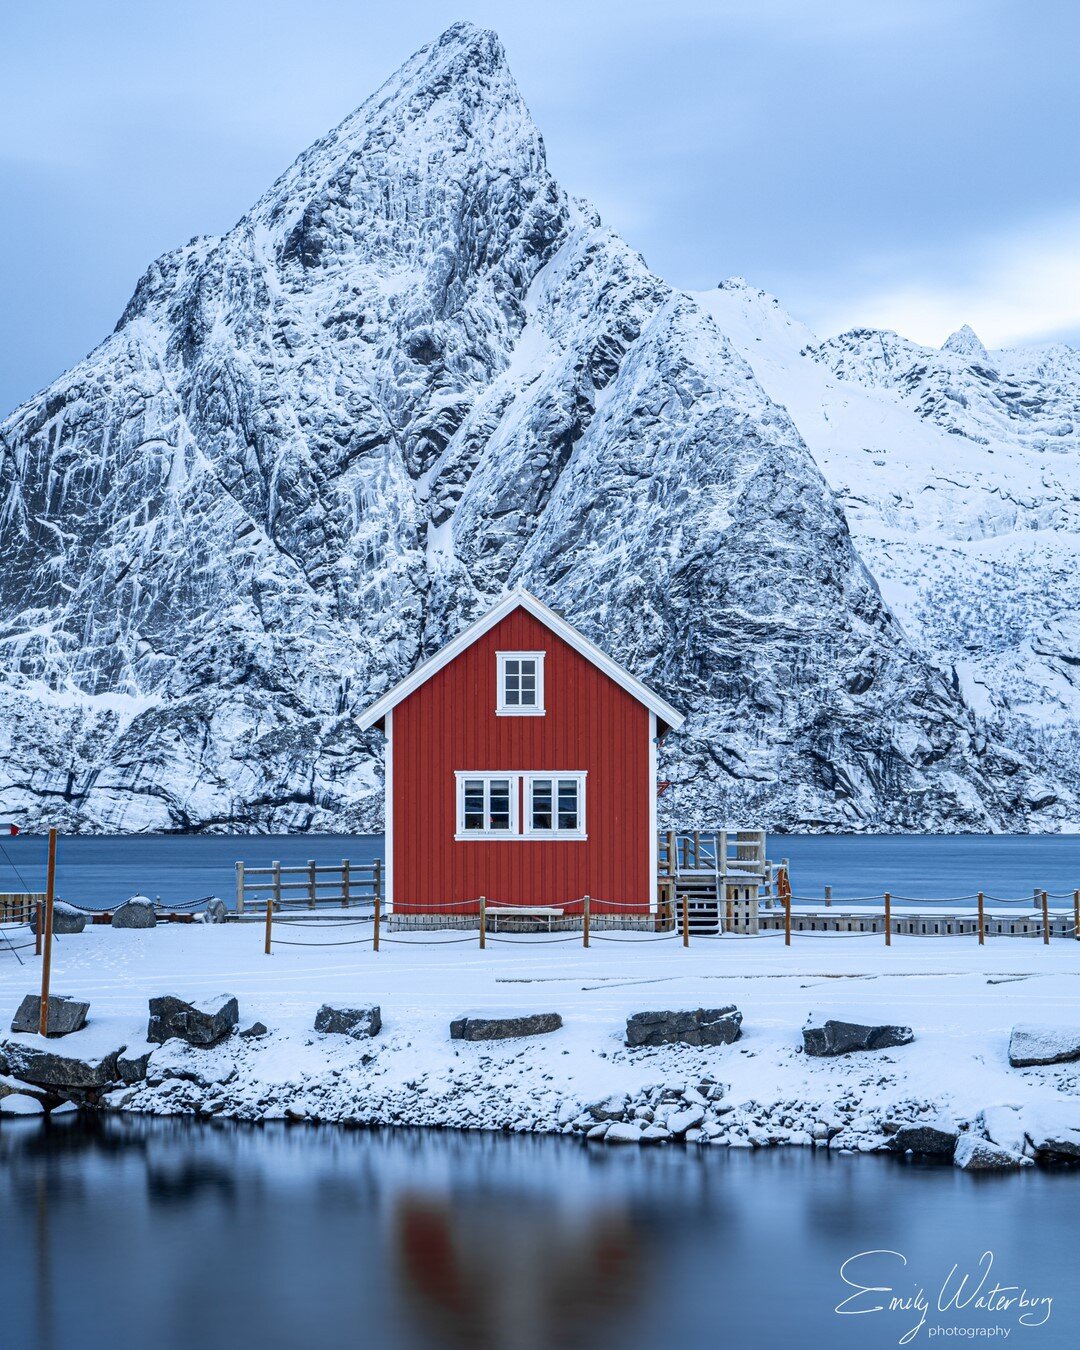 Red Cabin in the Lofoten Islands in Norway. Little secret, this cabin is actually yellow in real life (even though there are many truly red ones around). I altered the hue to make it red because I love how the red looks with the blue water!⠀⠀⠀⠀⠀⠀⠀⠀⠀
